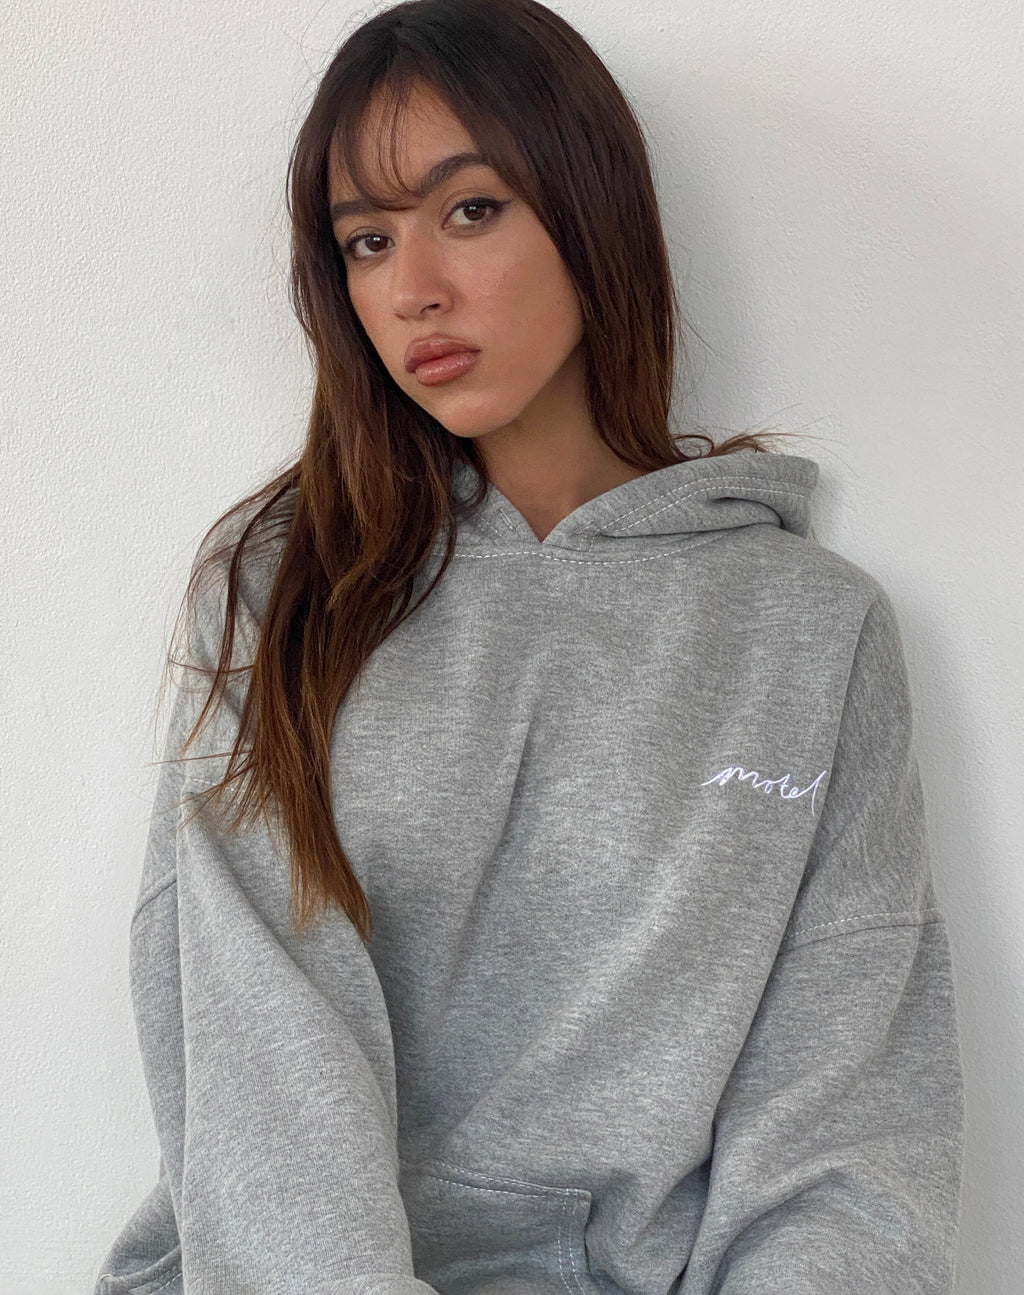 Oversize Hoodie in Grey Marl with Motel Scribble Embroidery